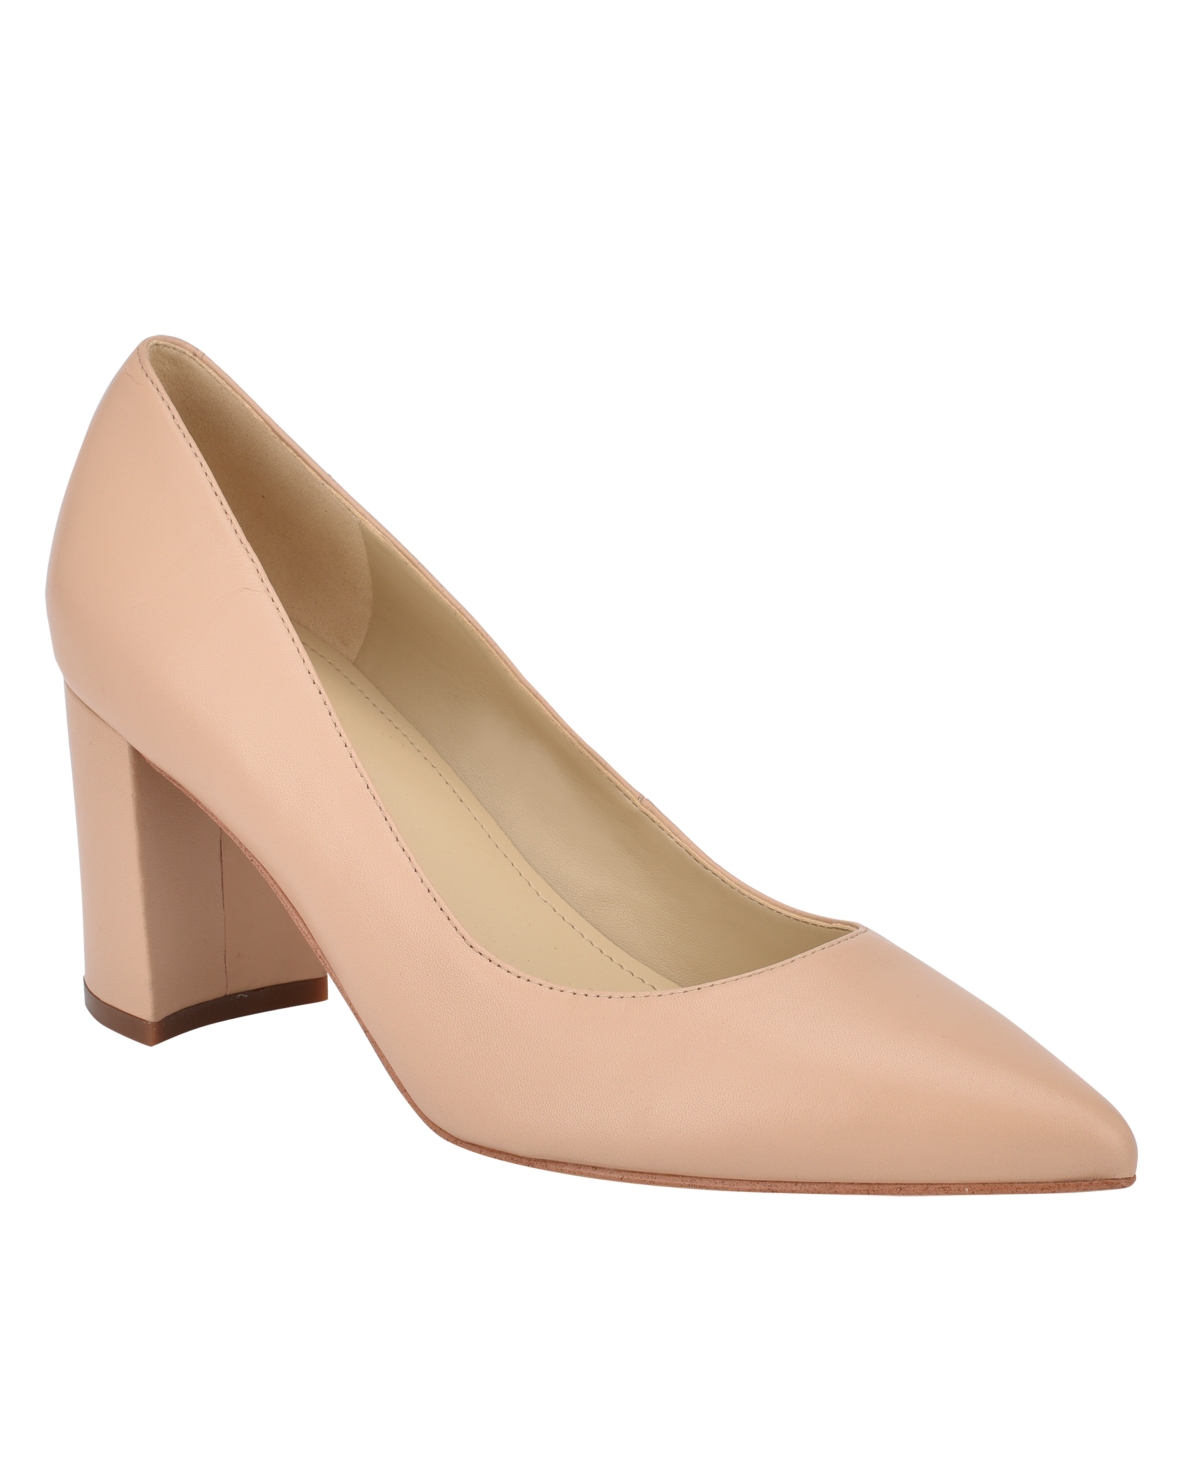 Marc Fisher Claire Dress Pump In Light Natural Leather